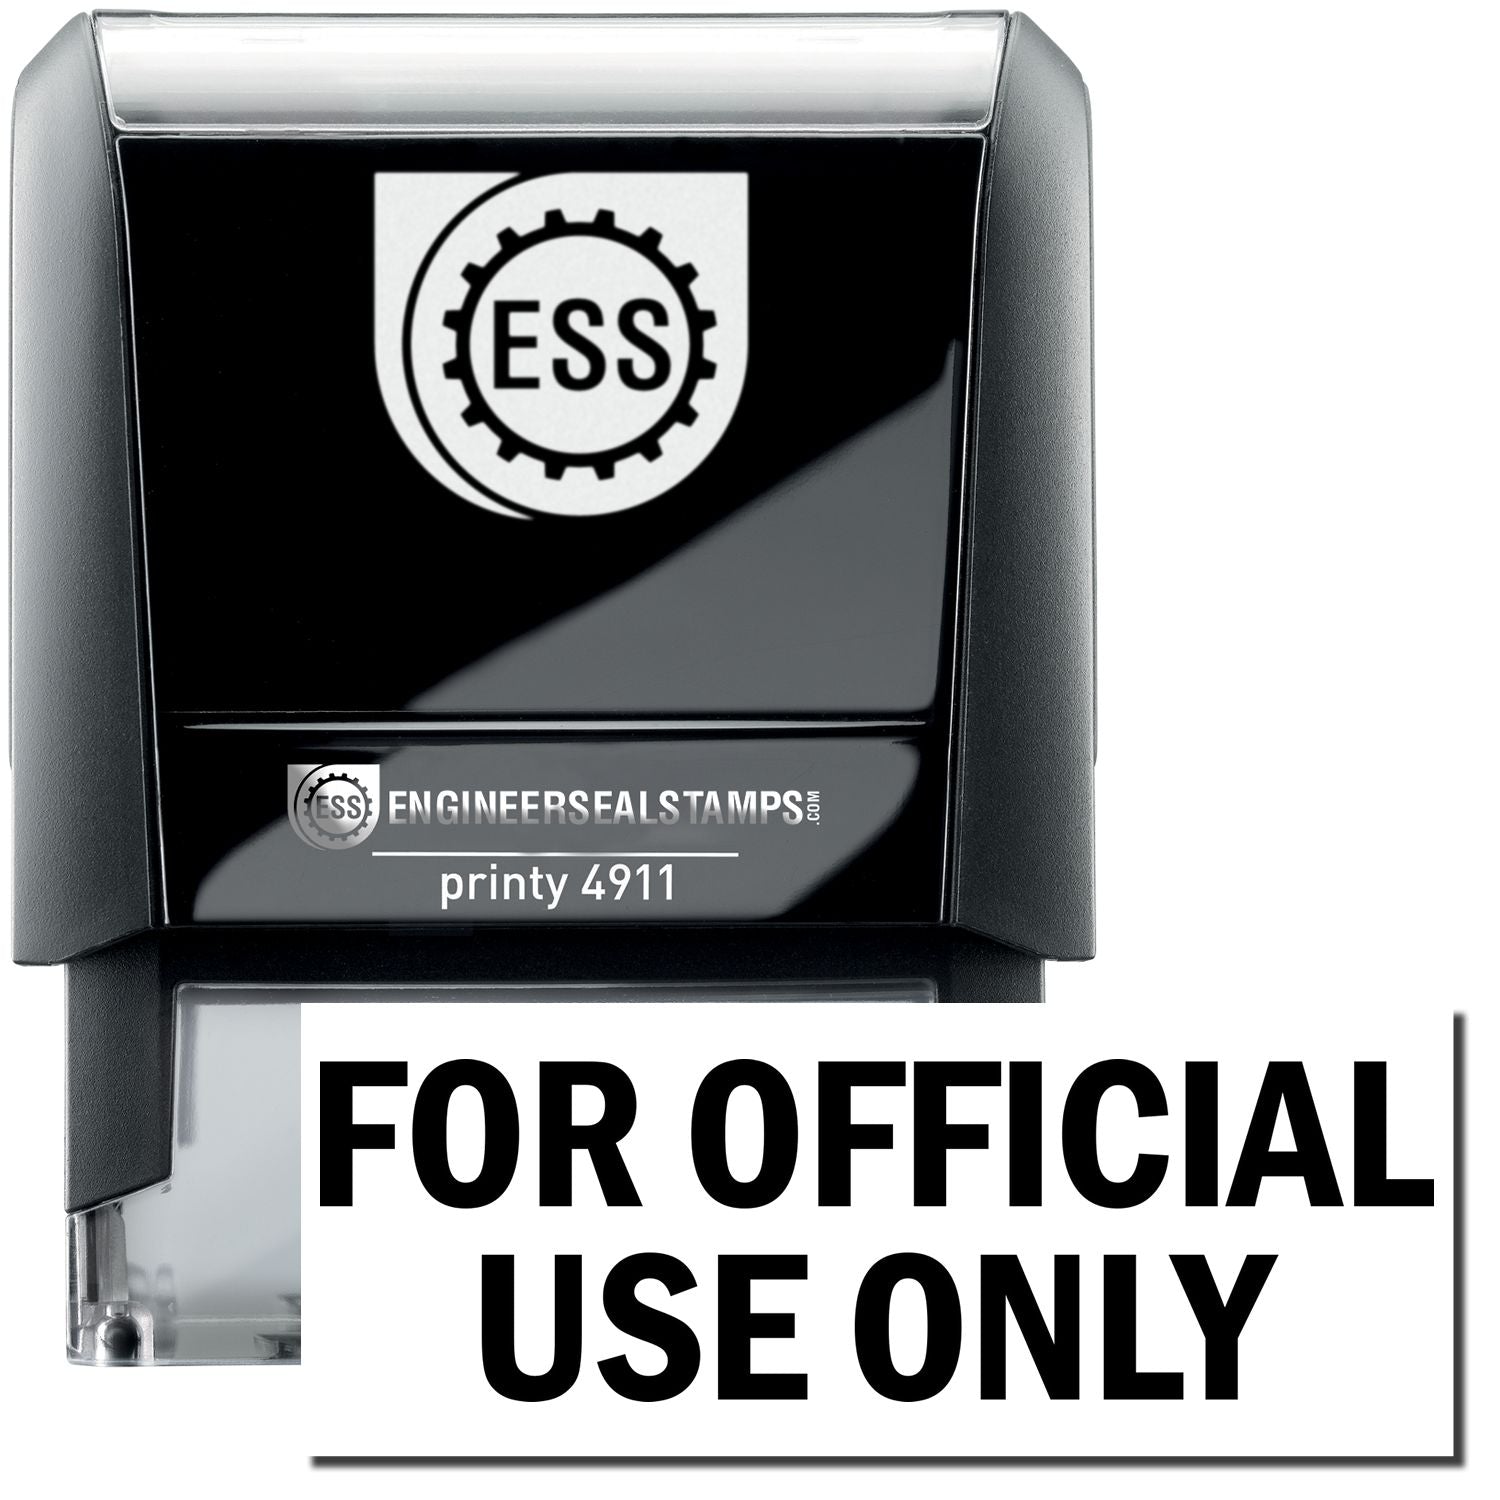 A self-inking stamp with a stamped image showing how the text "FOR OFFICIAL USE ONLY" is displayed after stamping.